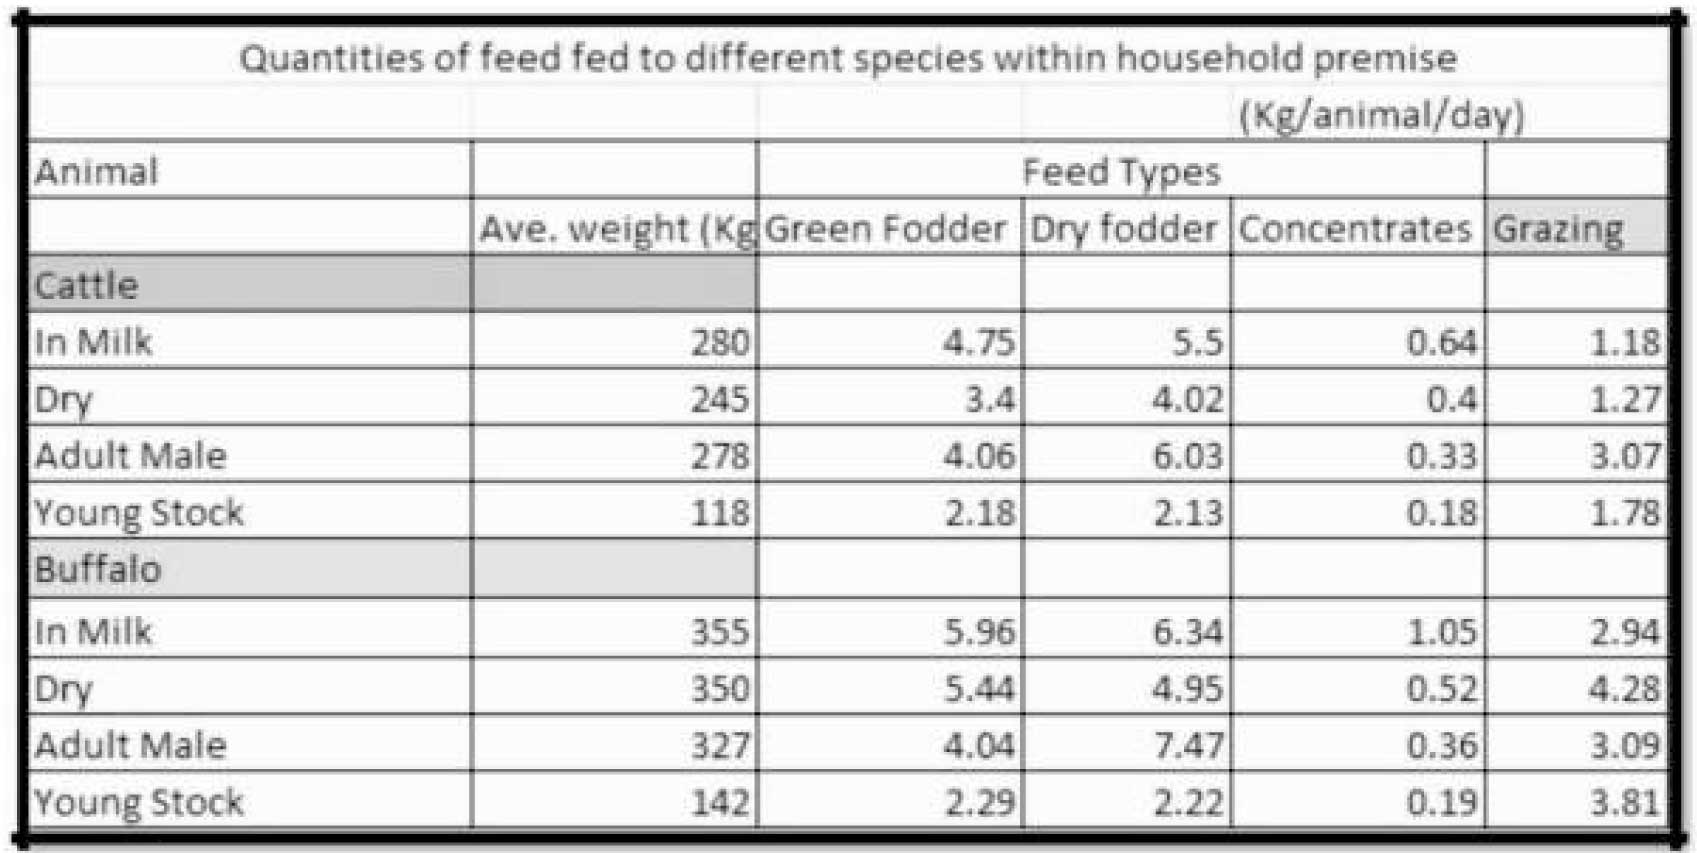 Indian Feed Industry - A Trend Analysis